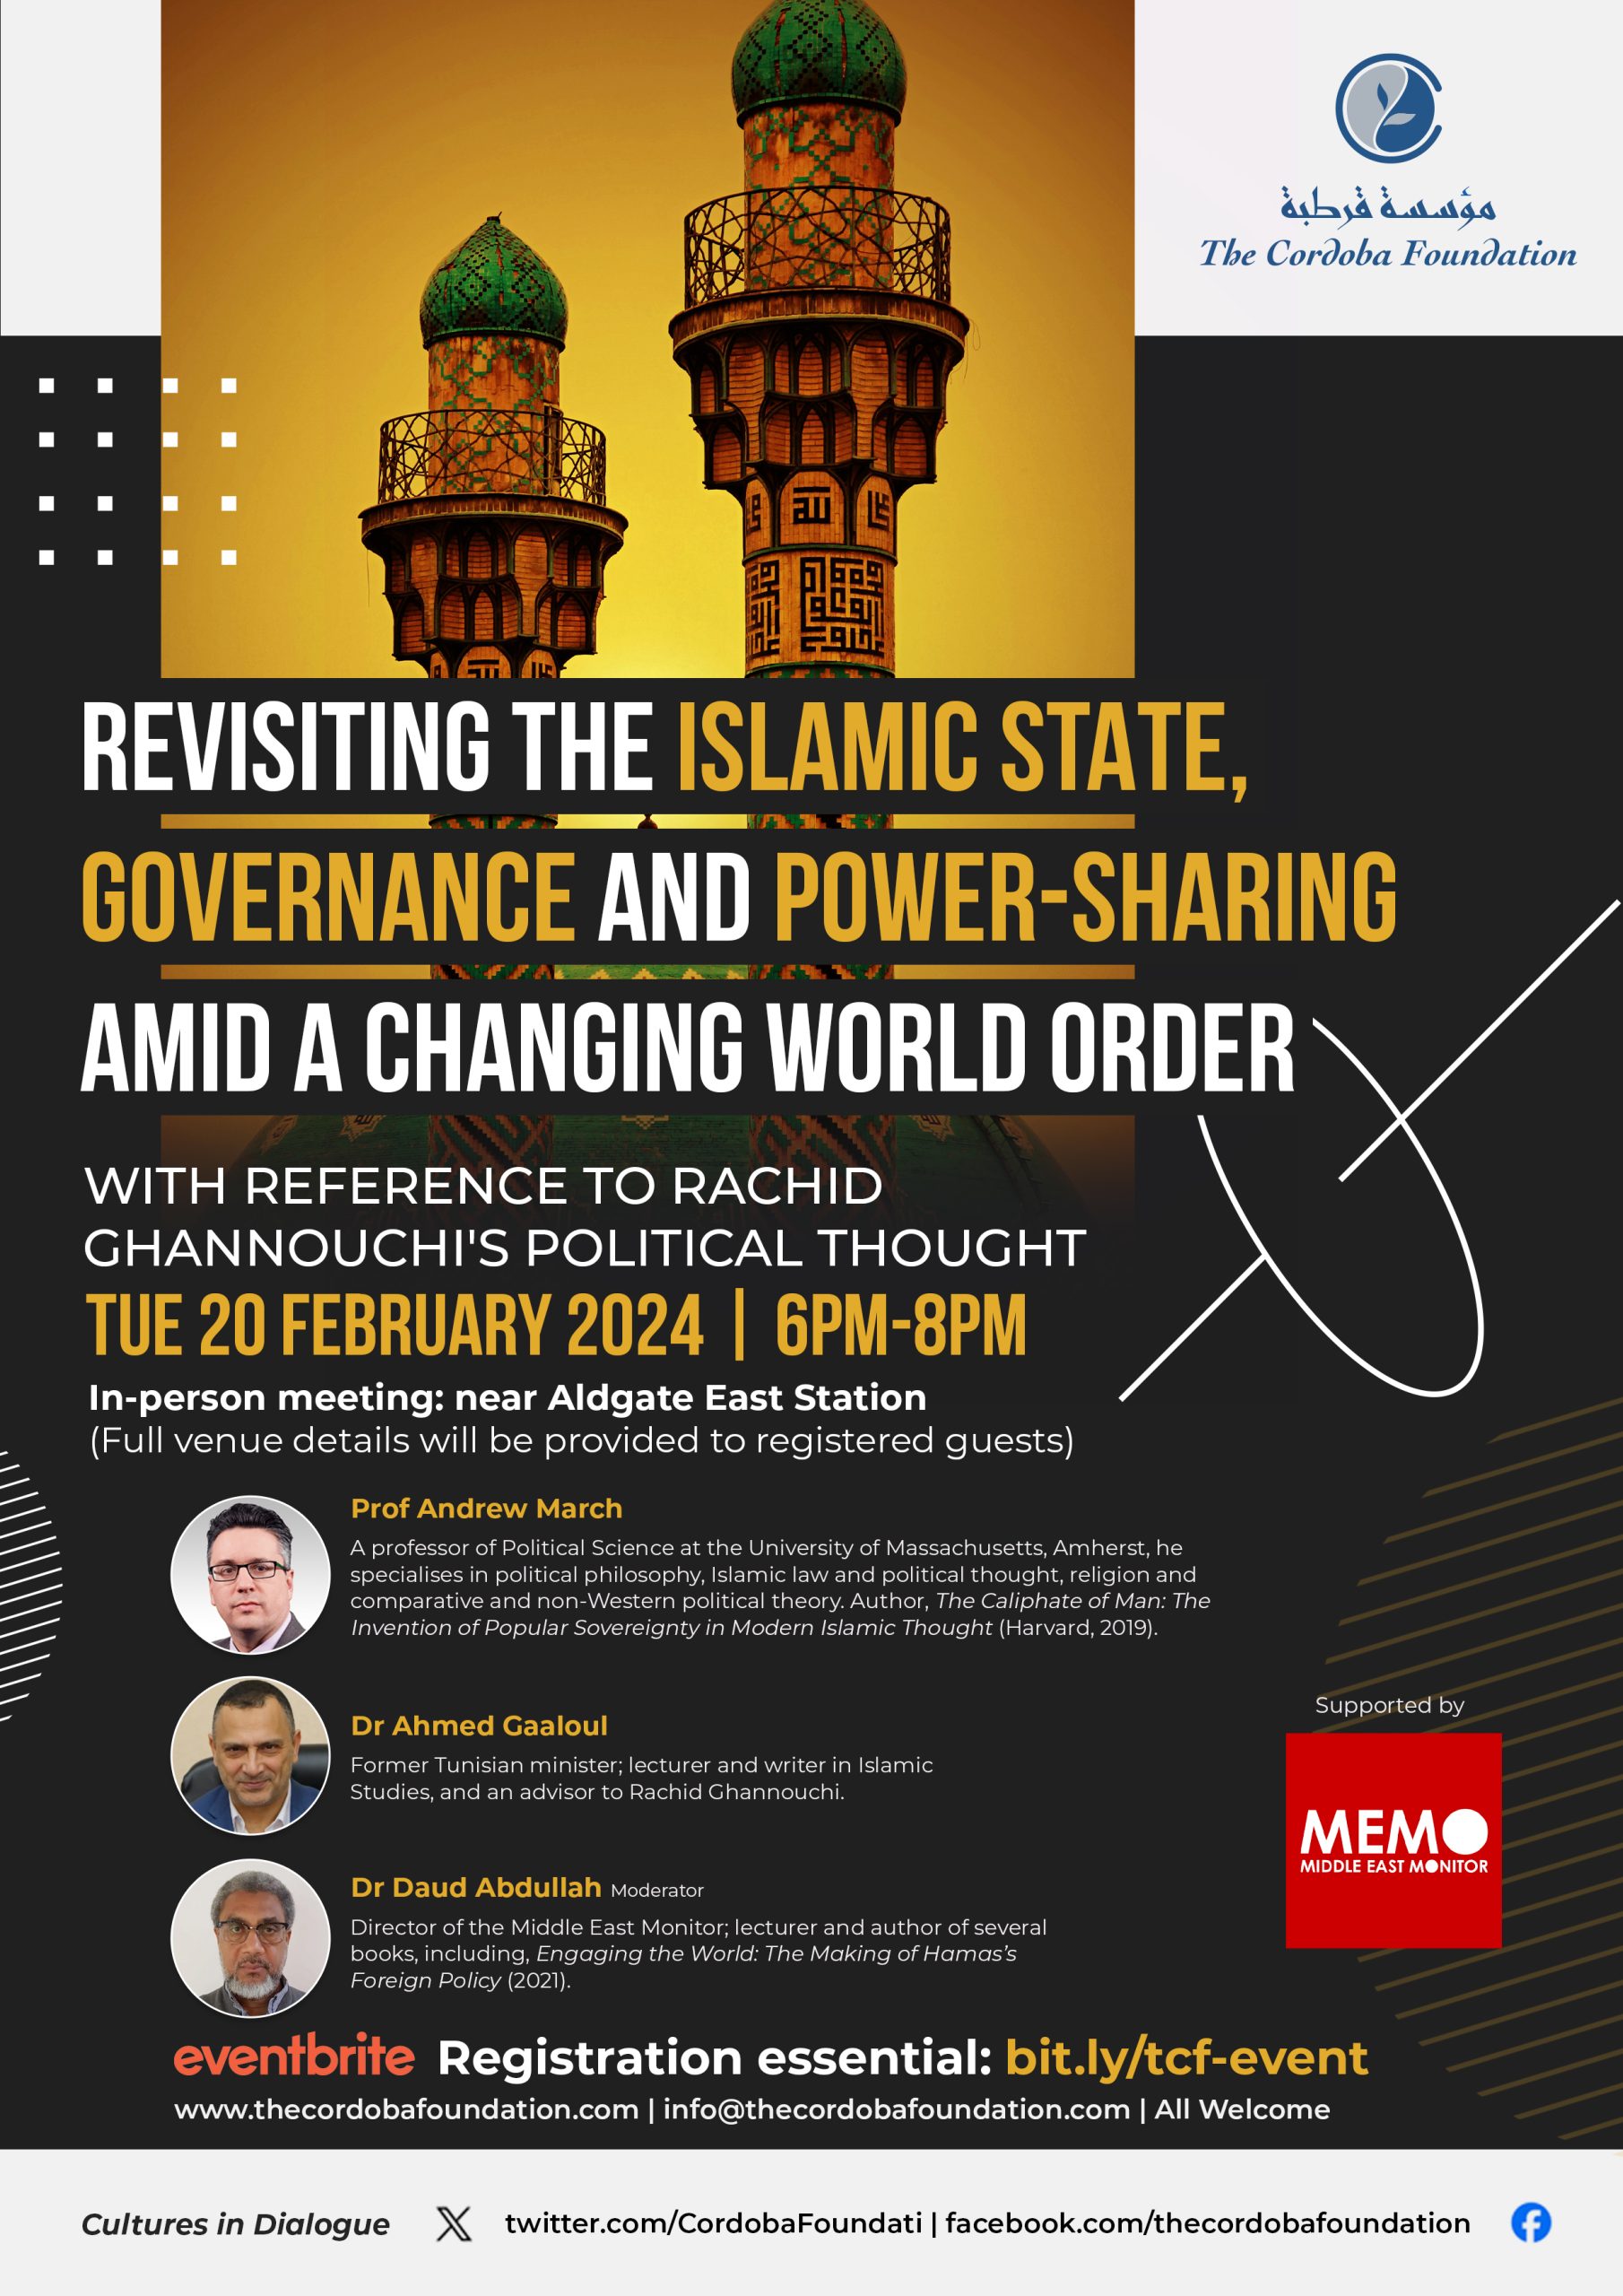 REVISITING THE ISLAMIC STATE, GOVERNANCE AND POWER-SHARING AMID A CHANGING WORLD ORDER